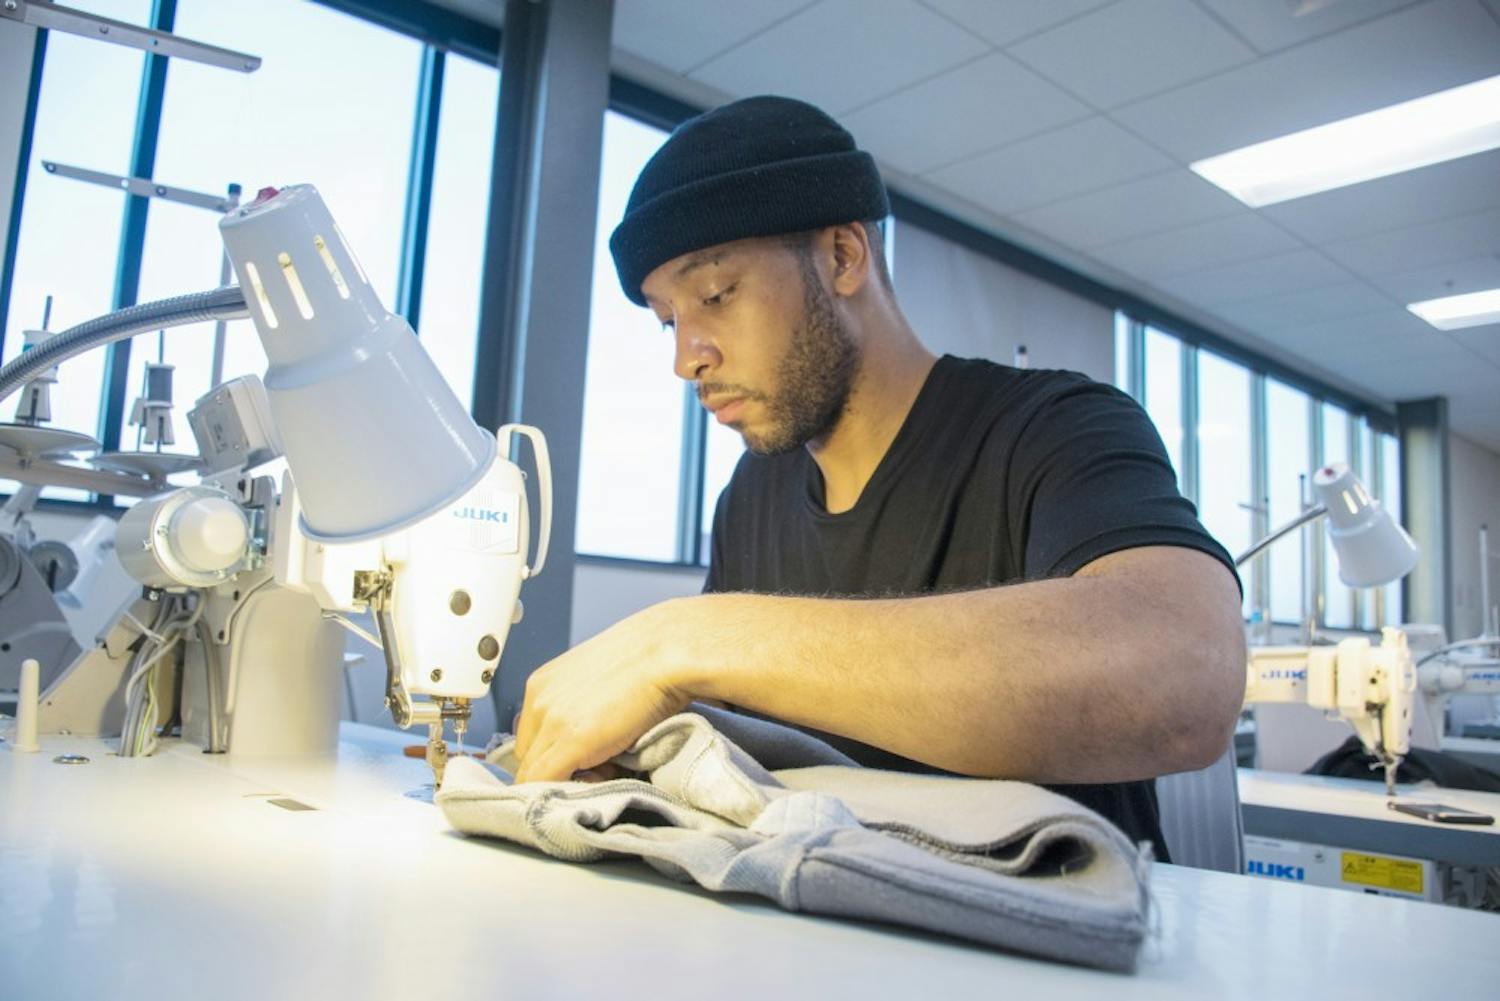 UB alumnus Rashaad Holley works on an original article of clothing. Holley recently won Best Collection at Buffalo State’s Runway 10 fashion show.